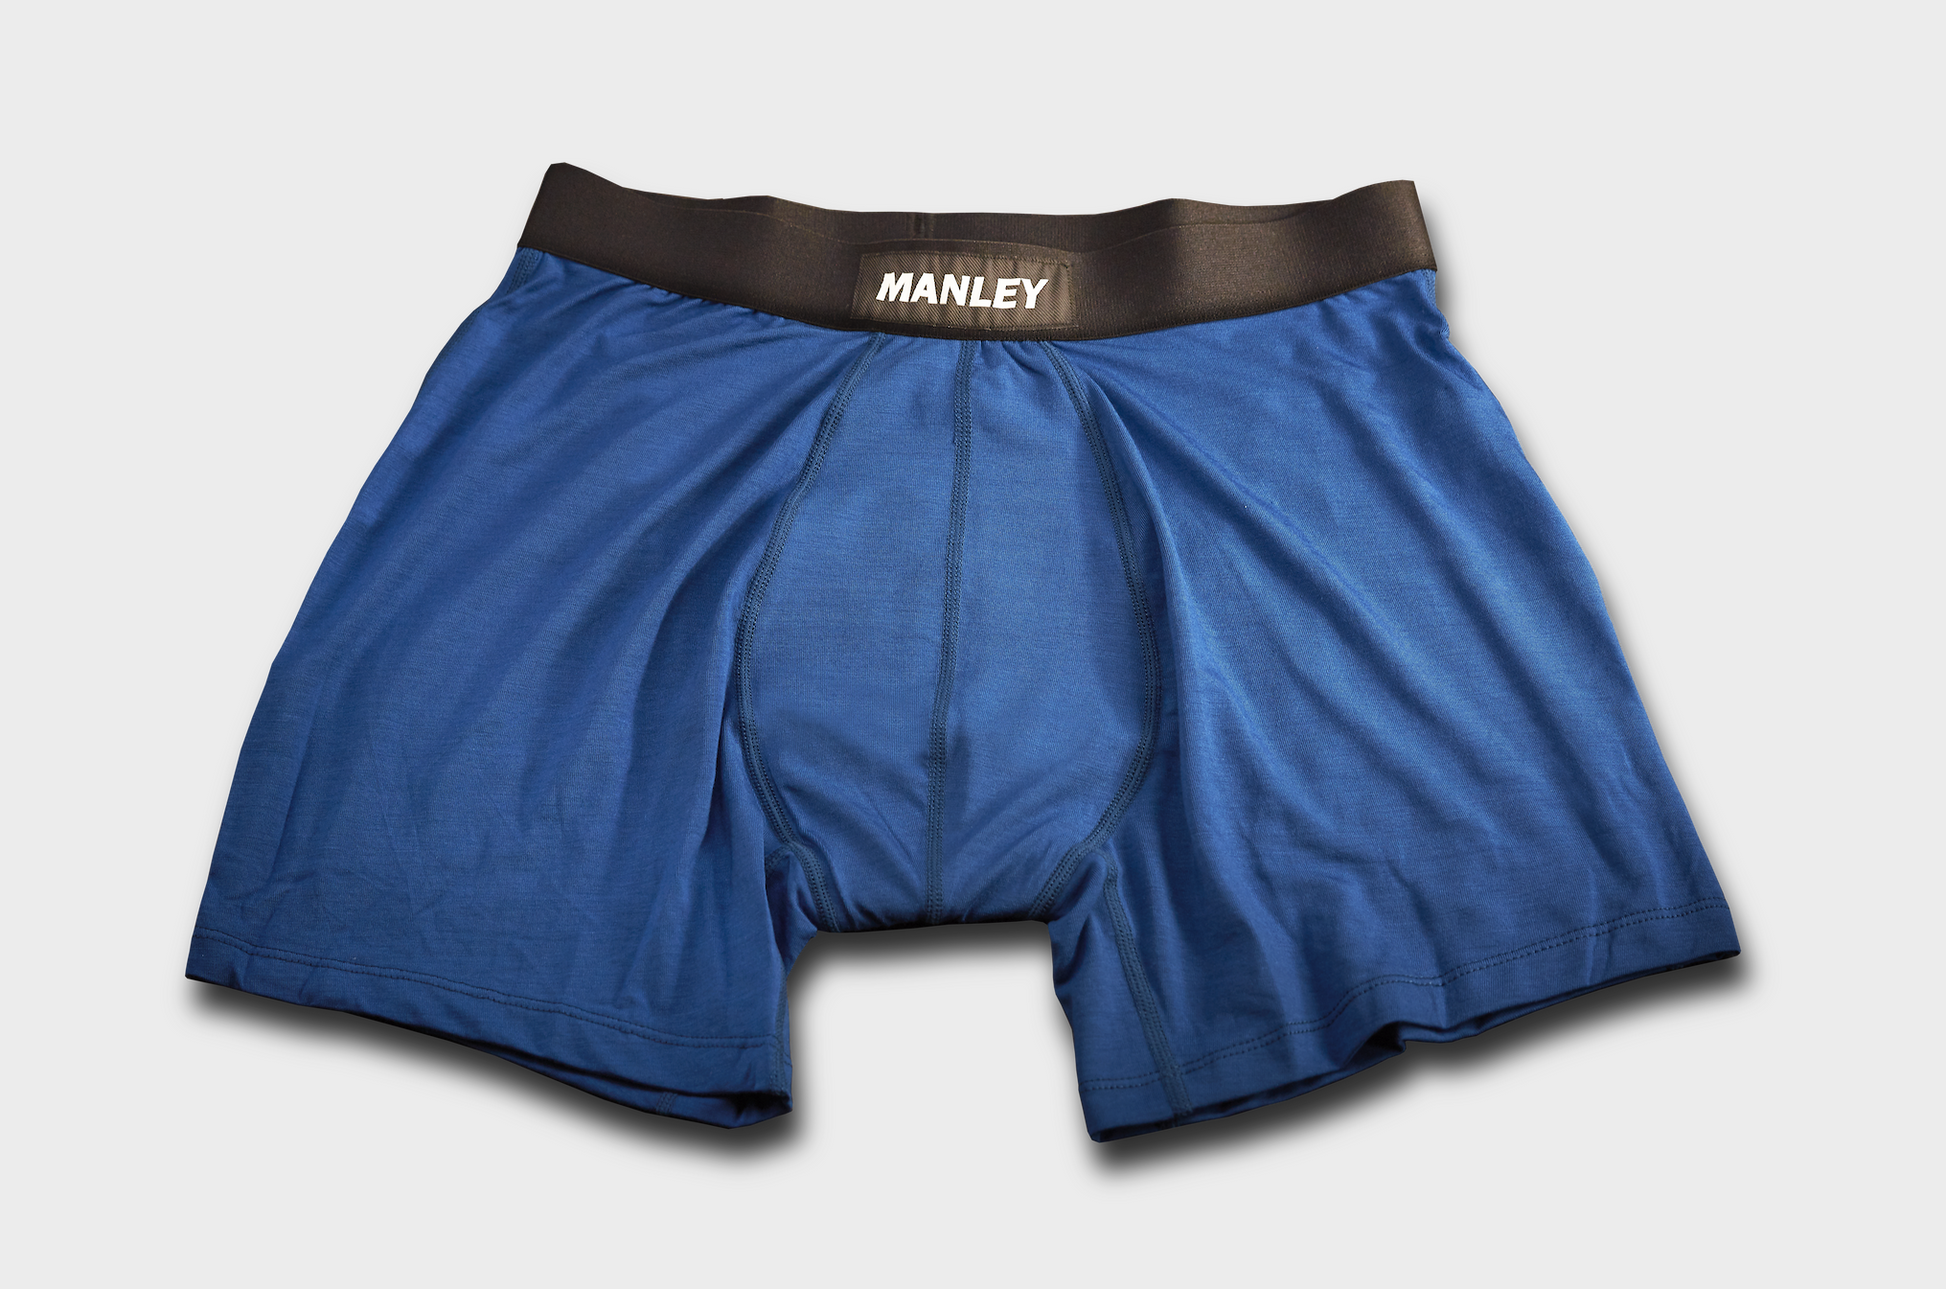 Black boxer briefs with Manley Barrier Technology that stops the pee spot. Feel manly in Manley. Eclectic blue boxer briefs photo, showing the Manley logo on the waistband 